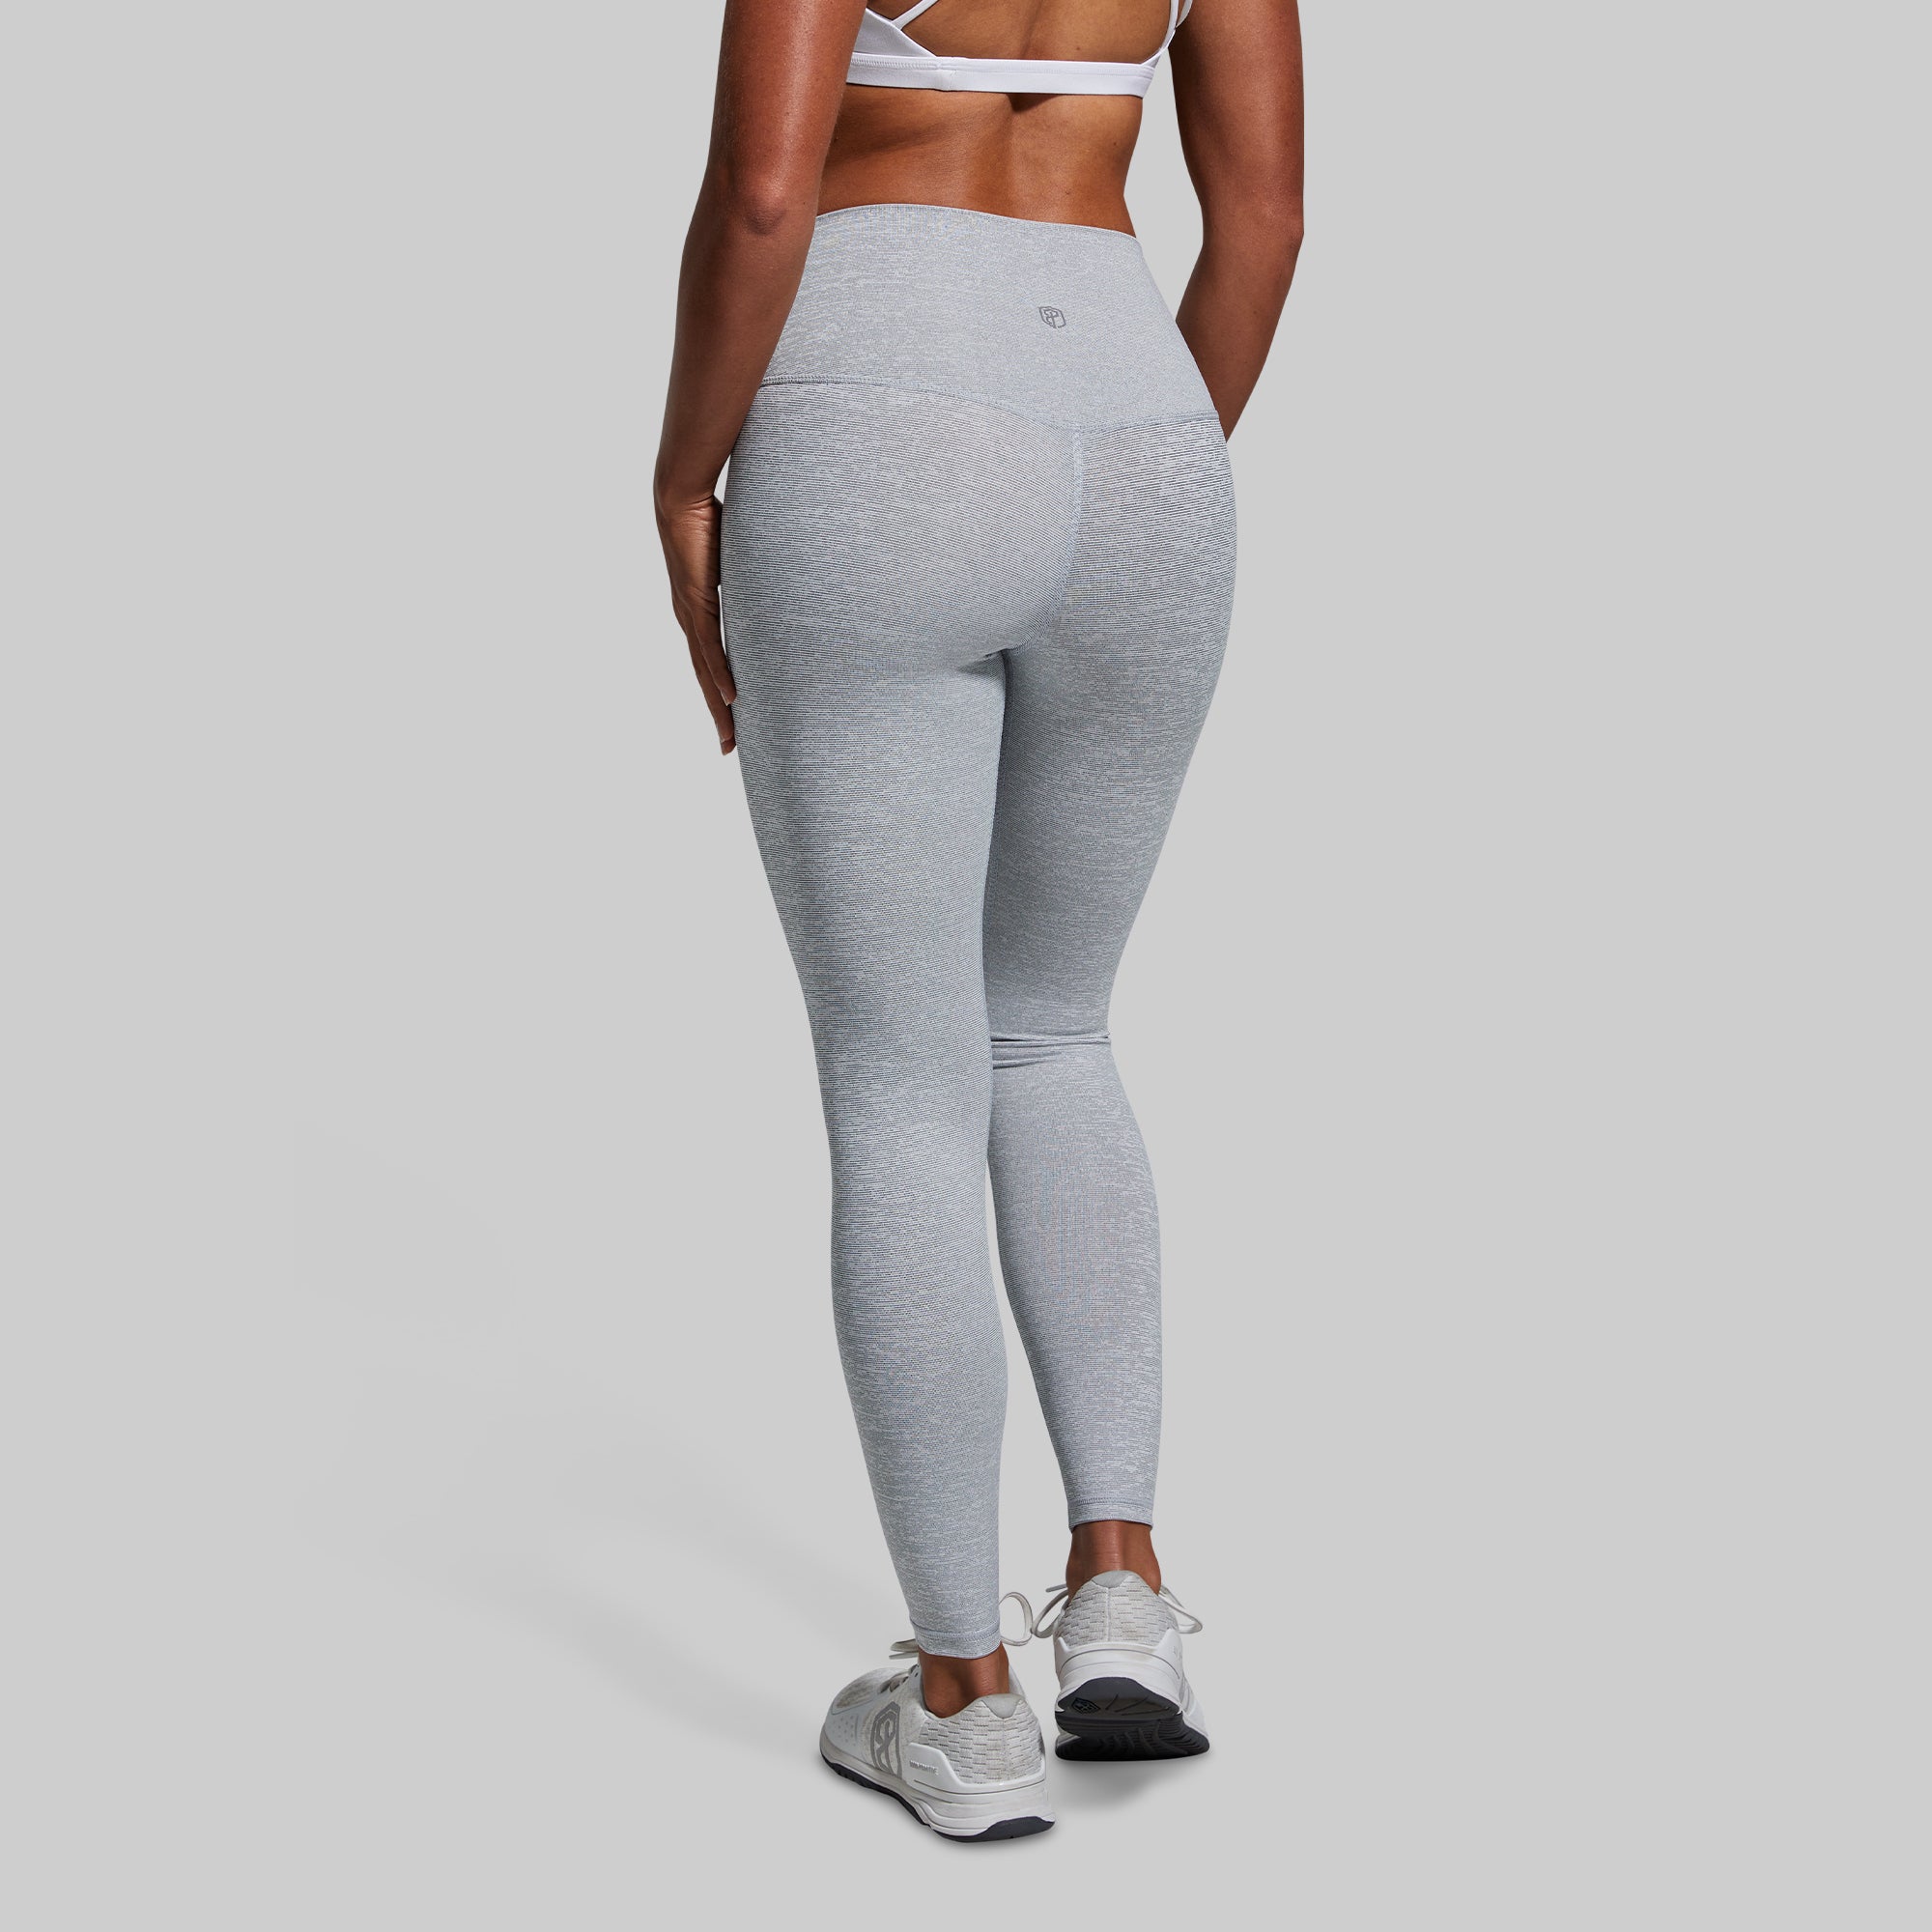 White High Waisted Workout Leggings – Born Primitive